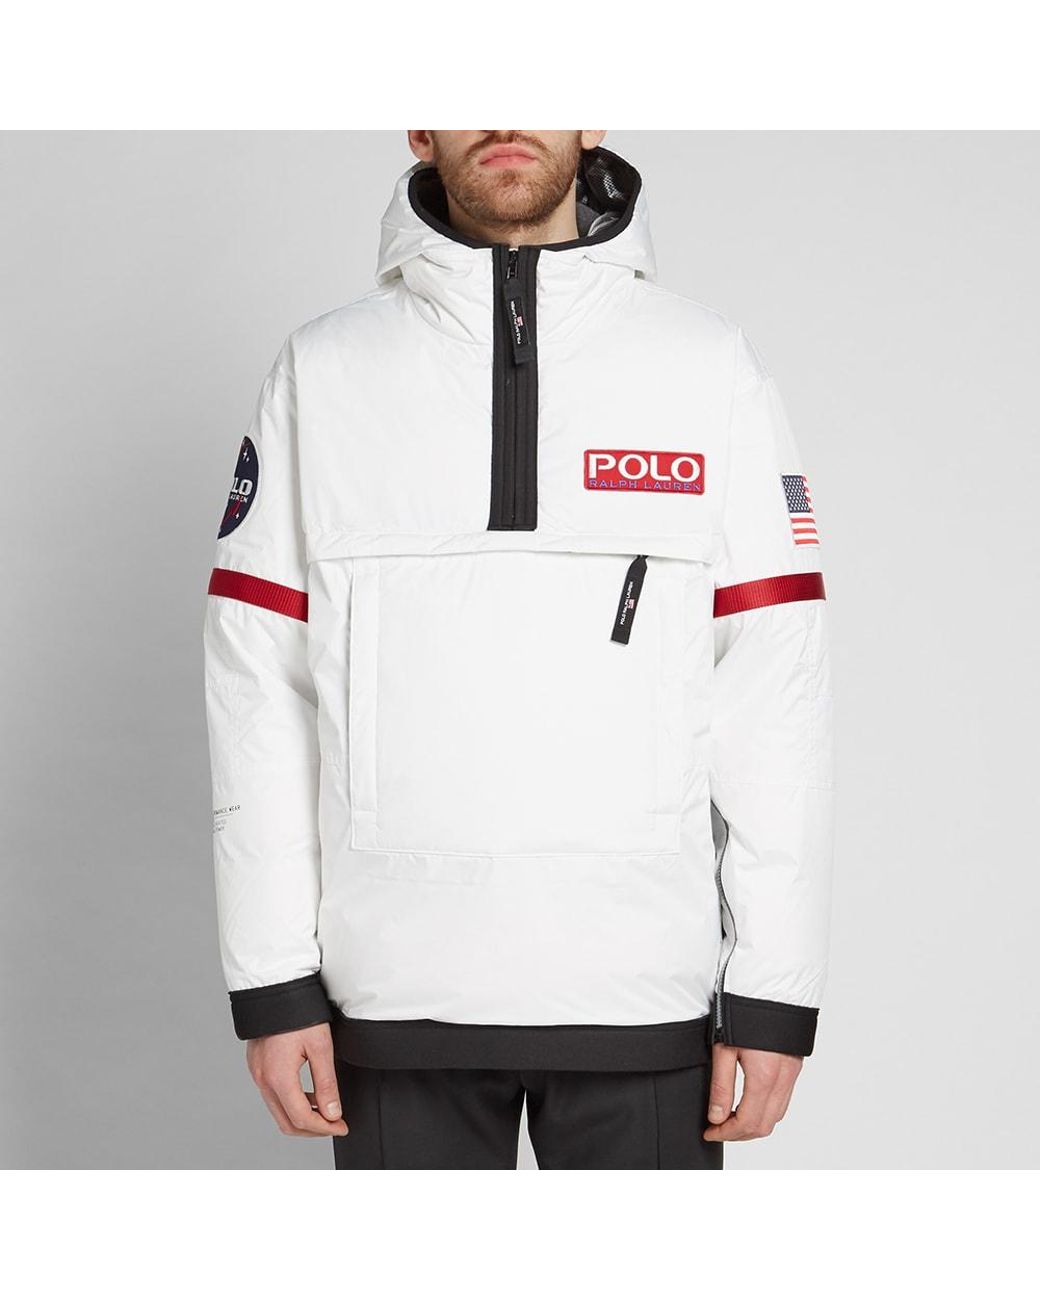 Polo Ralph Lauren Polo 11 Heated Jacket in White for Men | Lyst